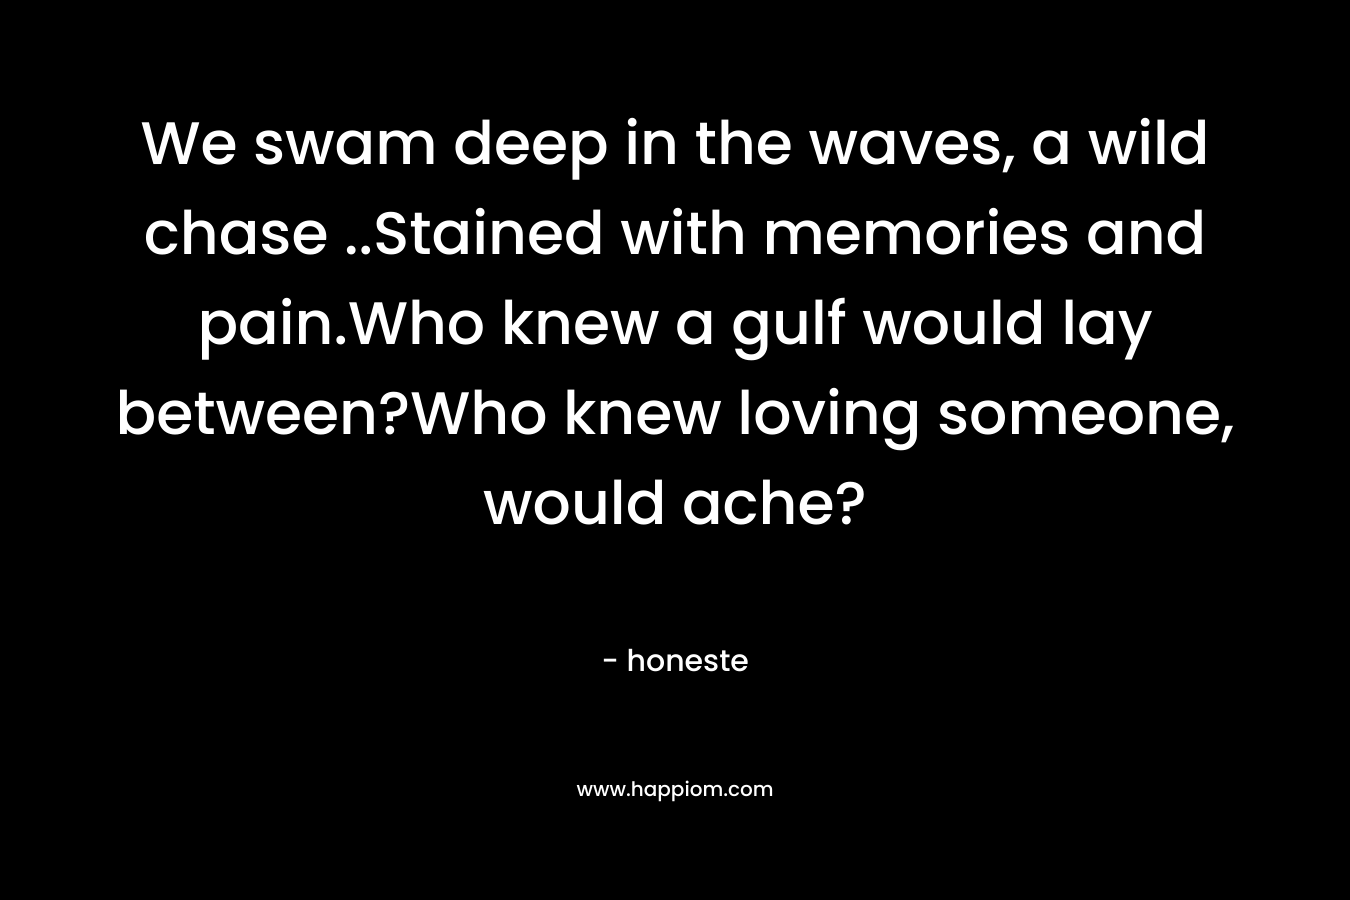 We swam deep in the waves, a wild chase ..Stained with memories and pain.Who knew a gulf would lay between?Who knew loving someone, would ache? – honeste